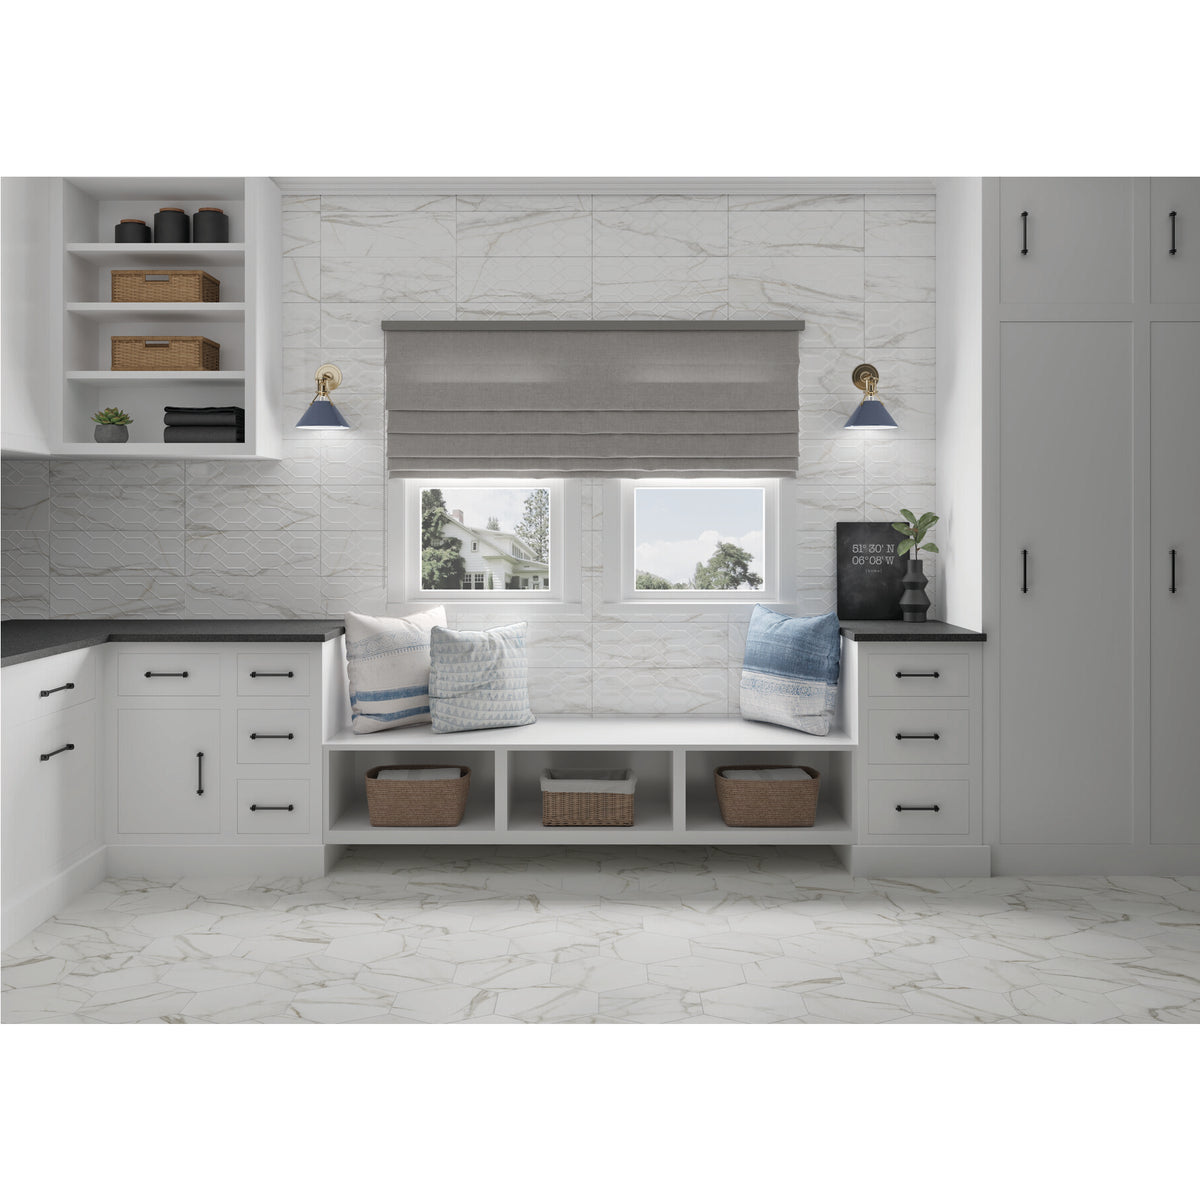 American Olean - Mythique Marble 12 in. x 24 in. Colorbody Porcelain Tile - Calacatta Venecia Polished Room Scene